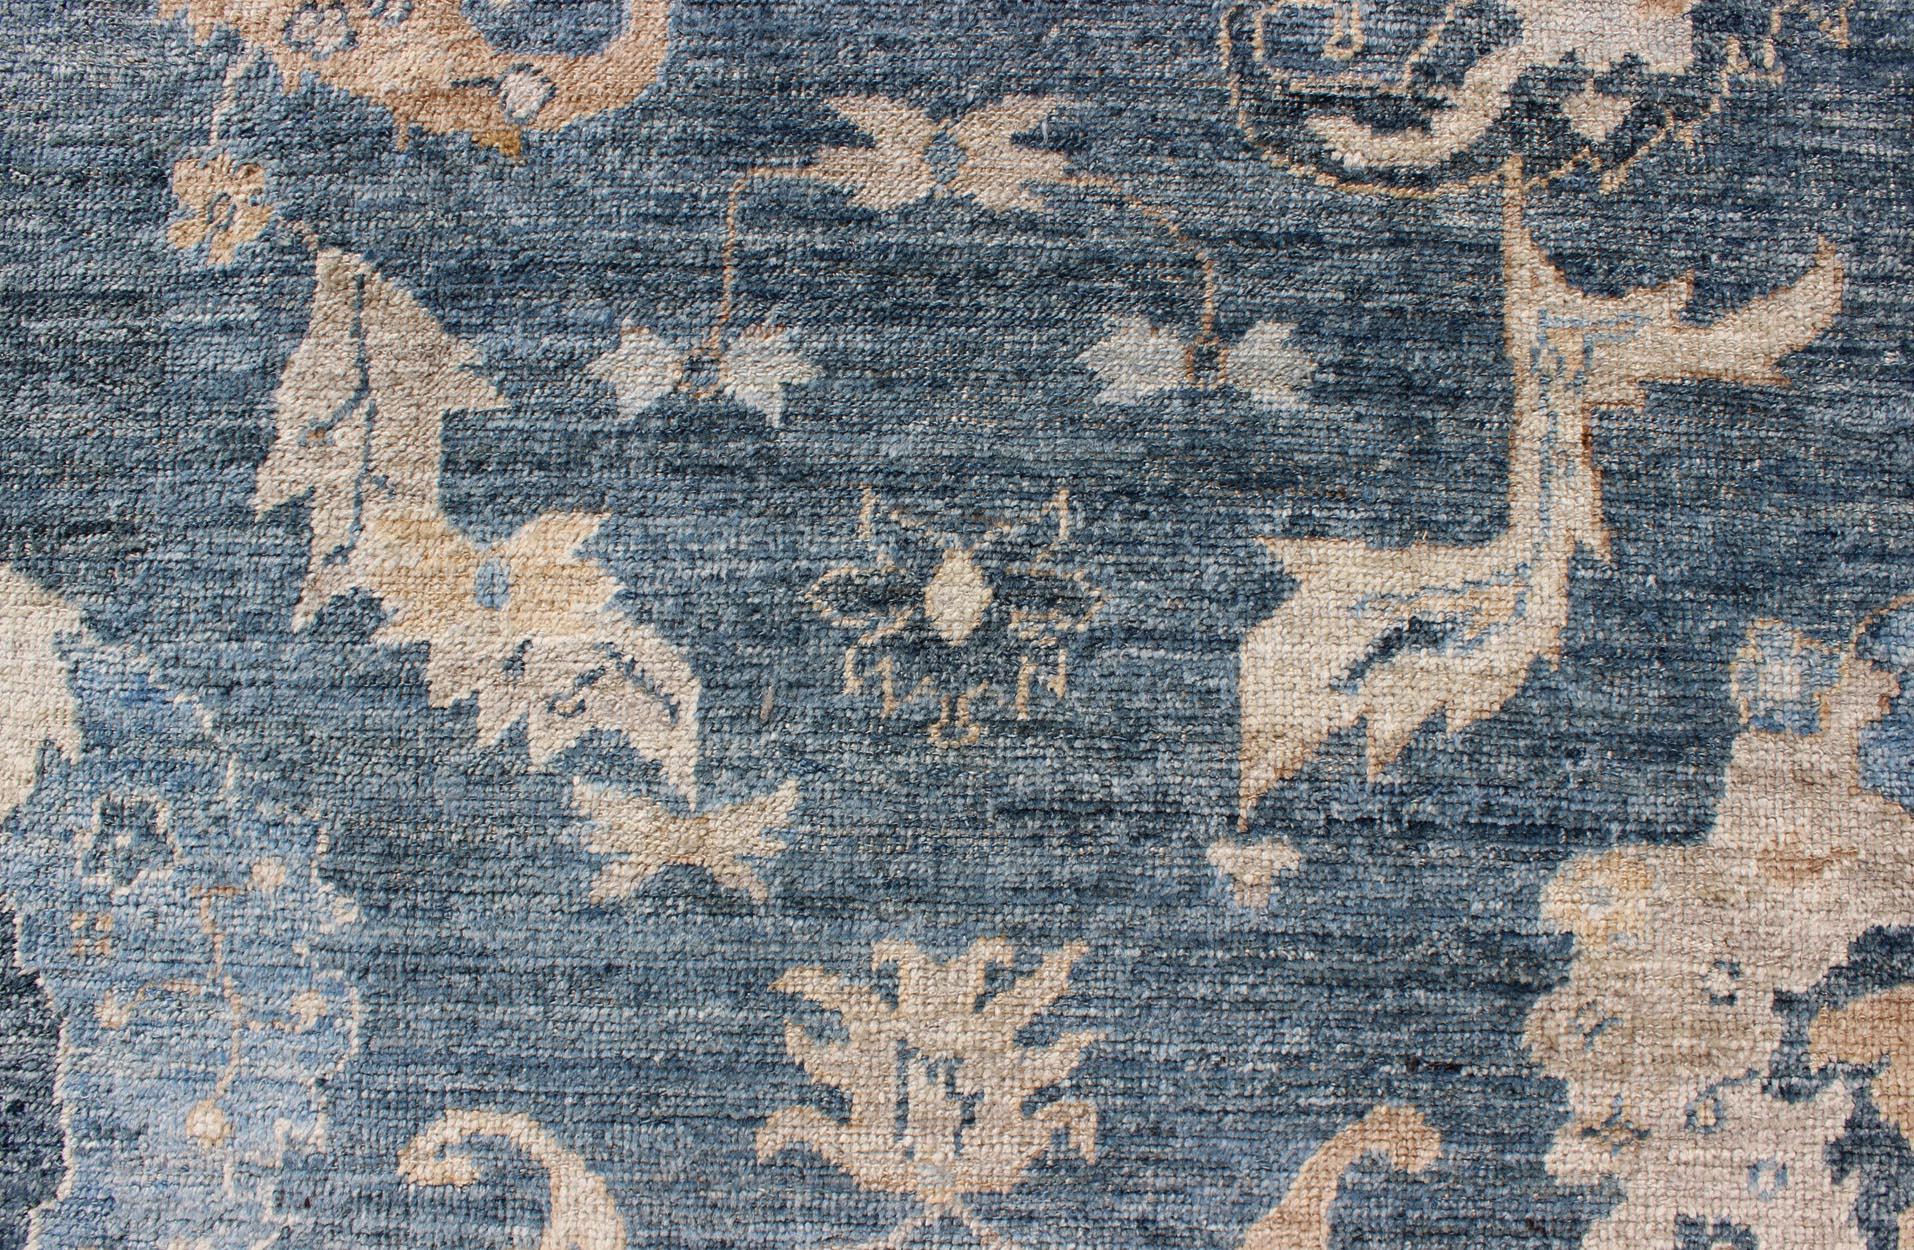 Angora Turkish Oushak Rug in Shades of Blue and Tan 2